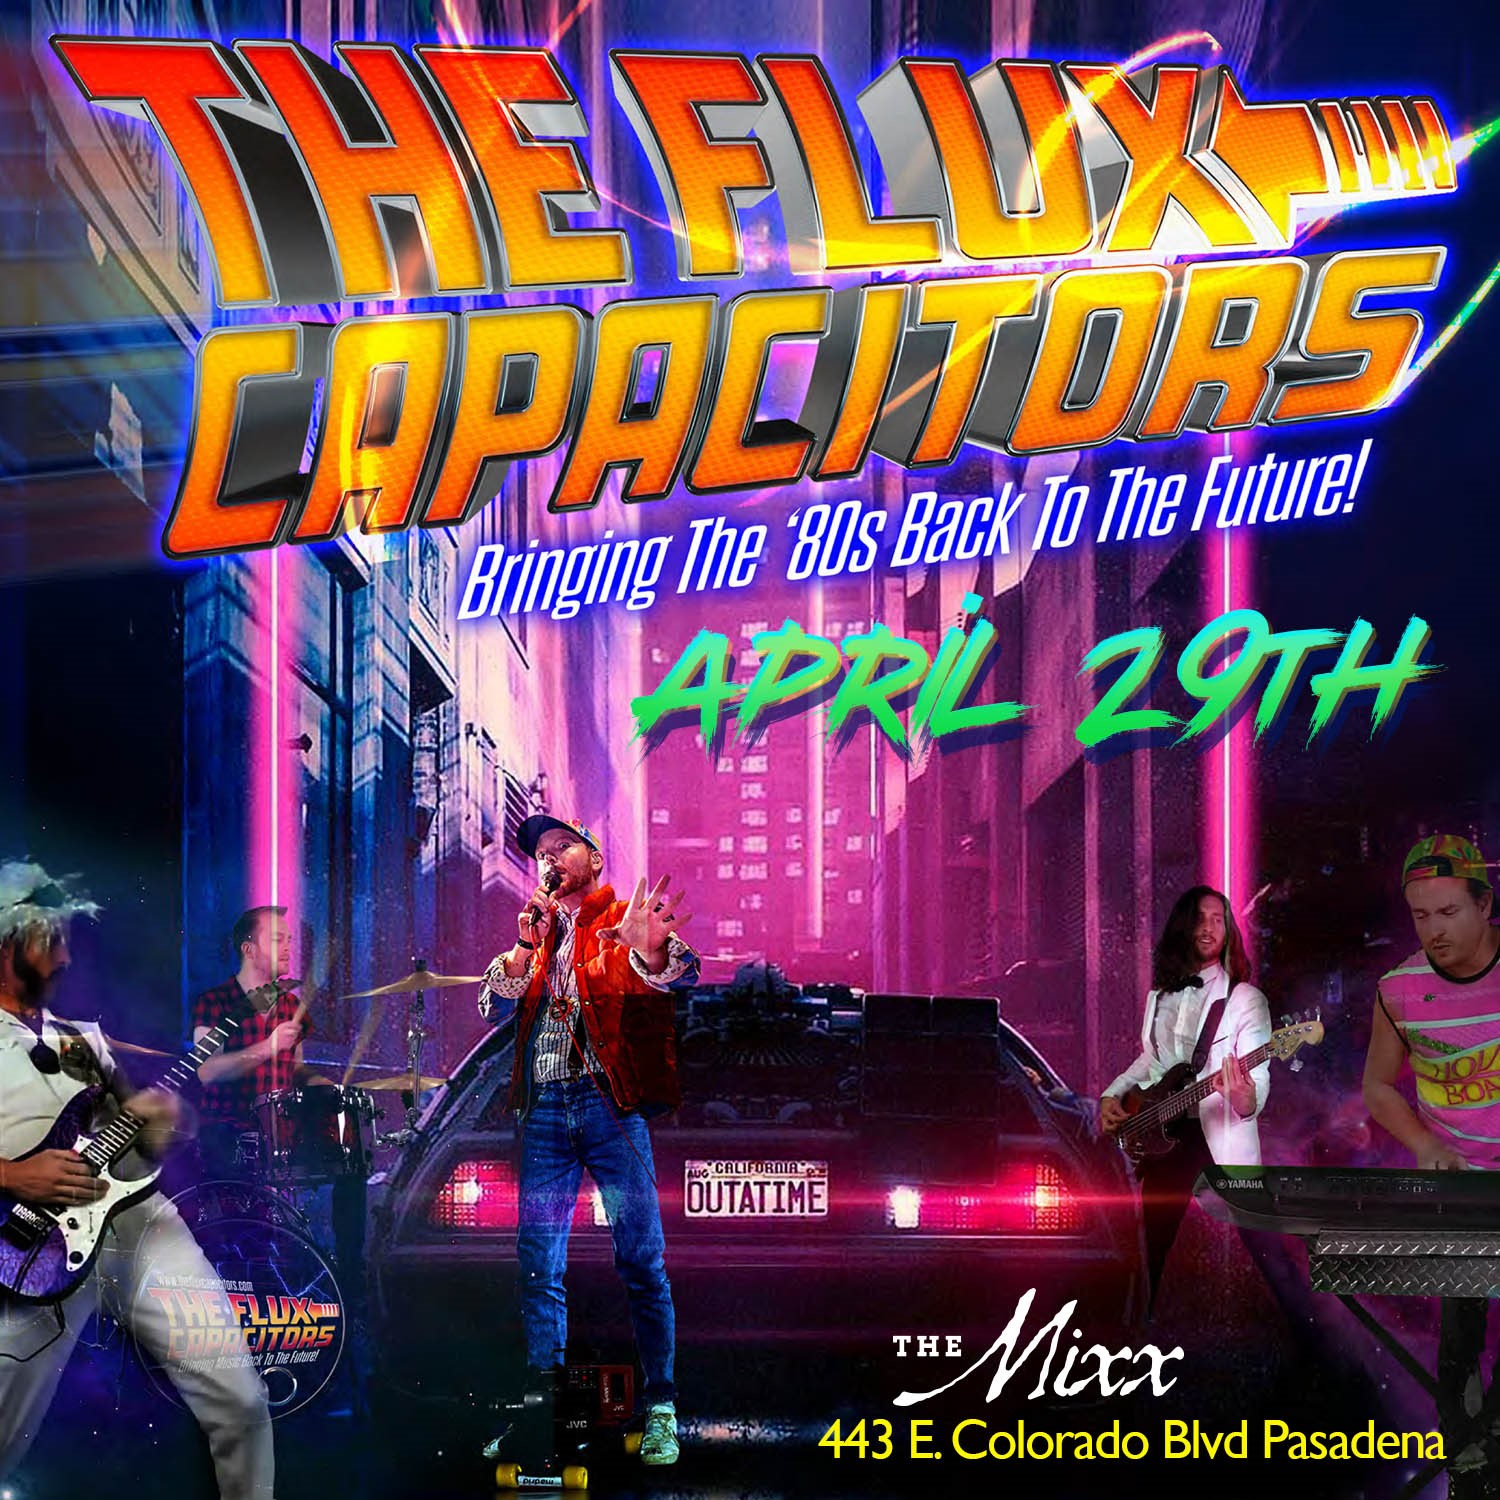 You are currently viewing The Flux Capacitors – Bringing 80s back to the Future!